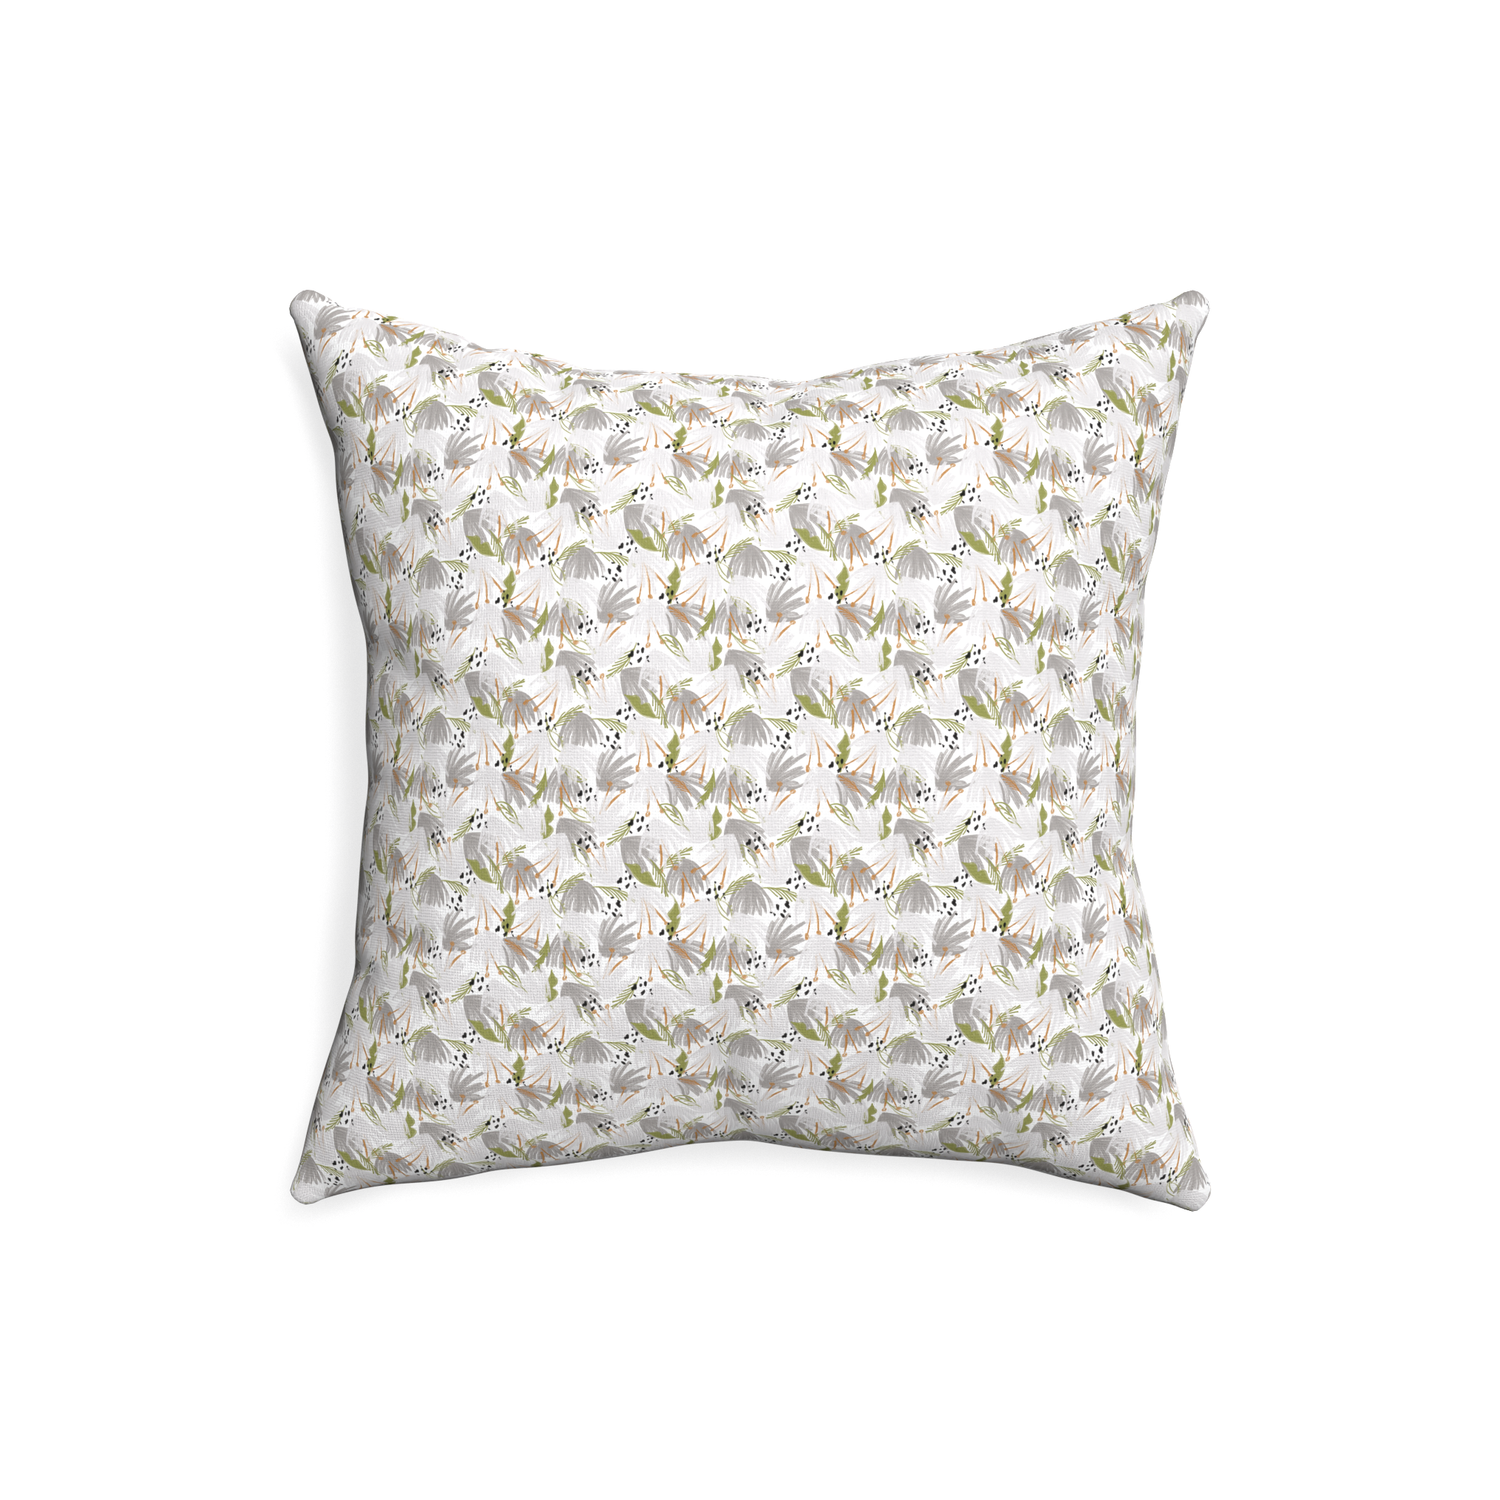 20-square eden grey custom grey floralpillow with none on white background